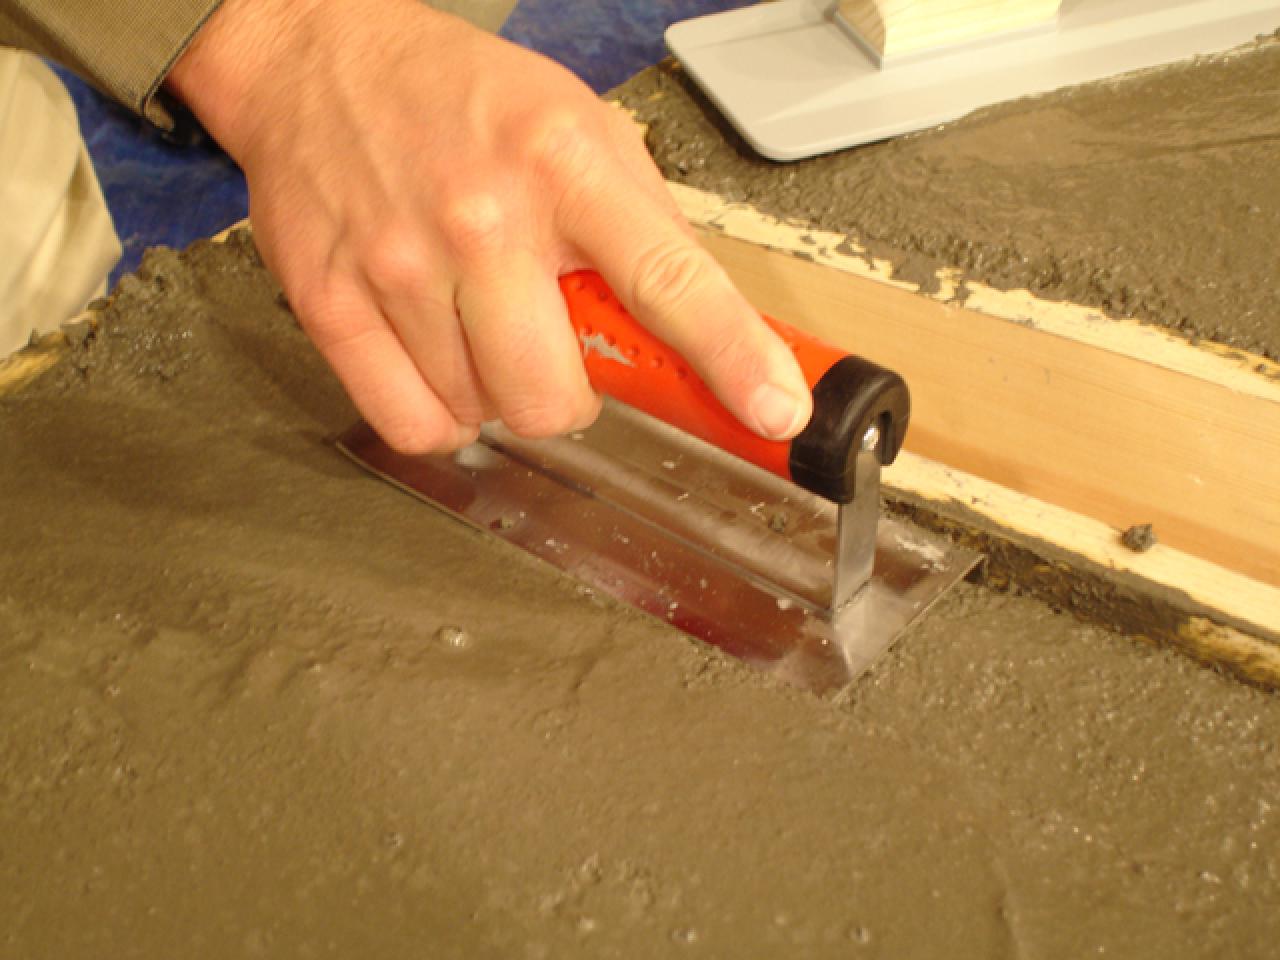 Concrete Finishing Tools | how-tos | DIY